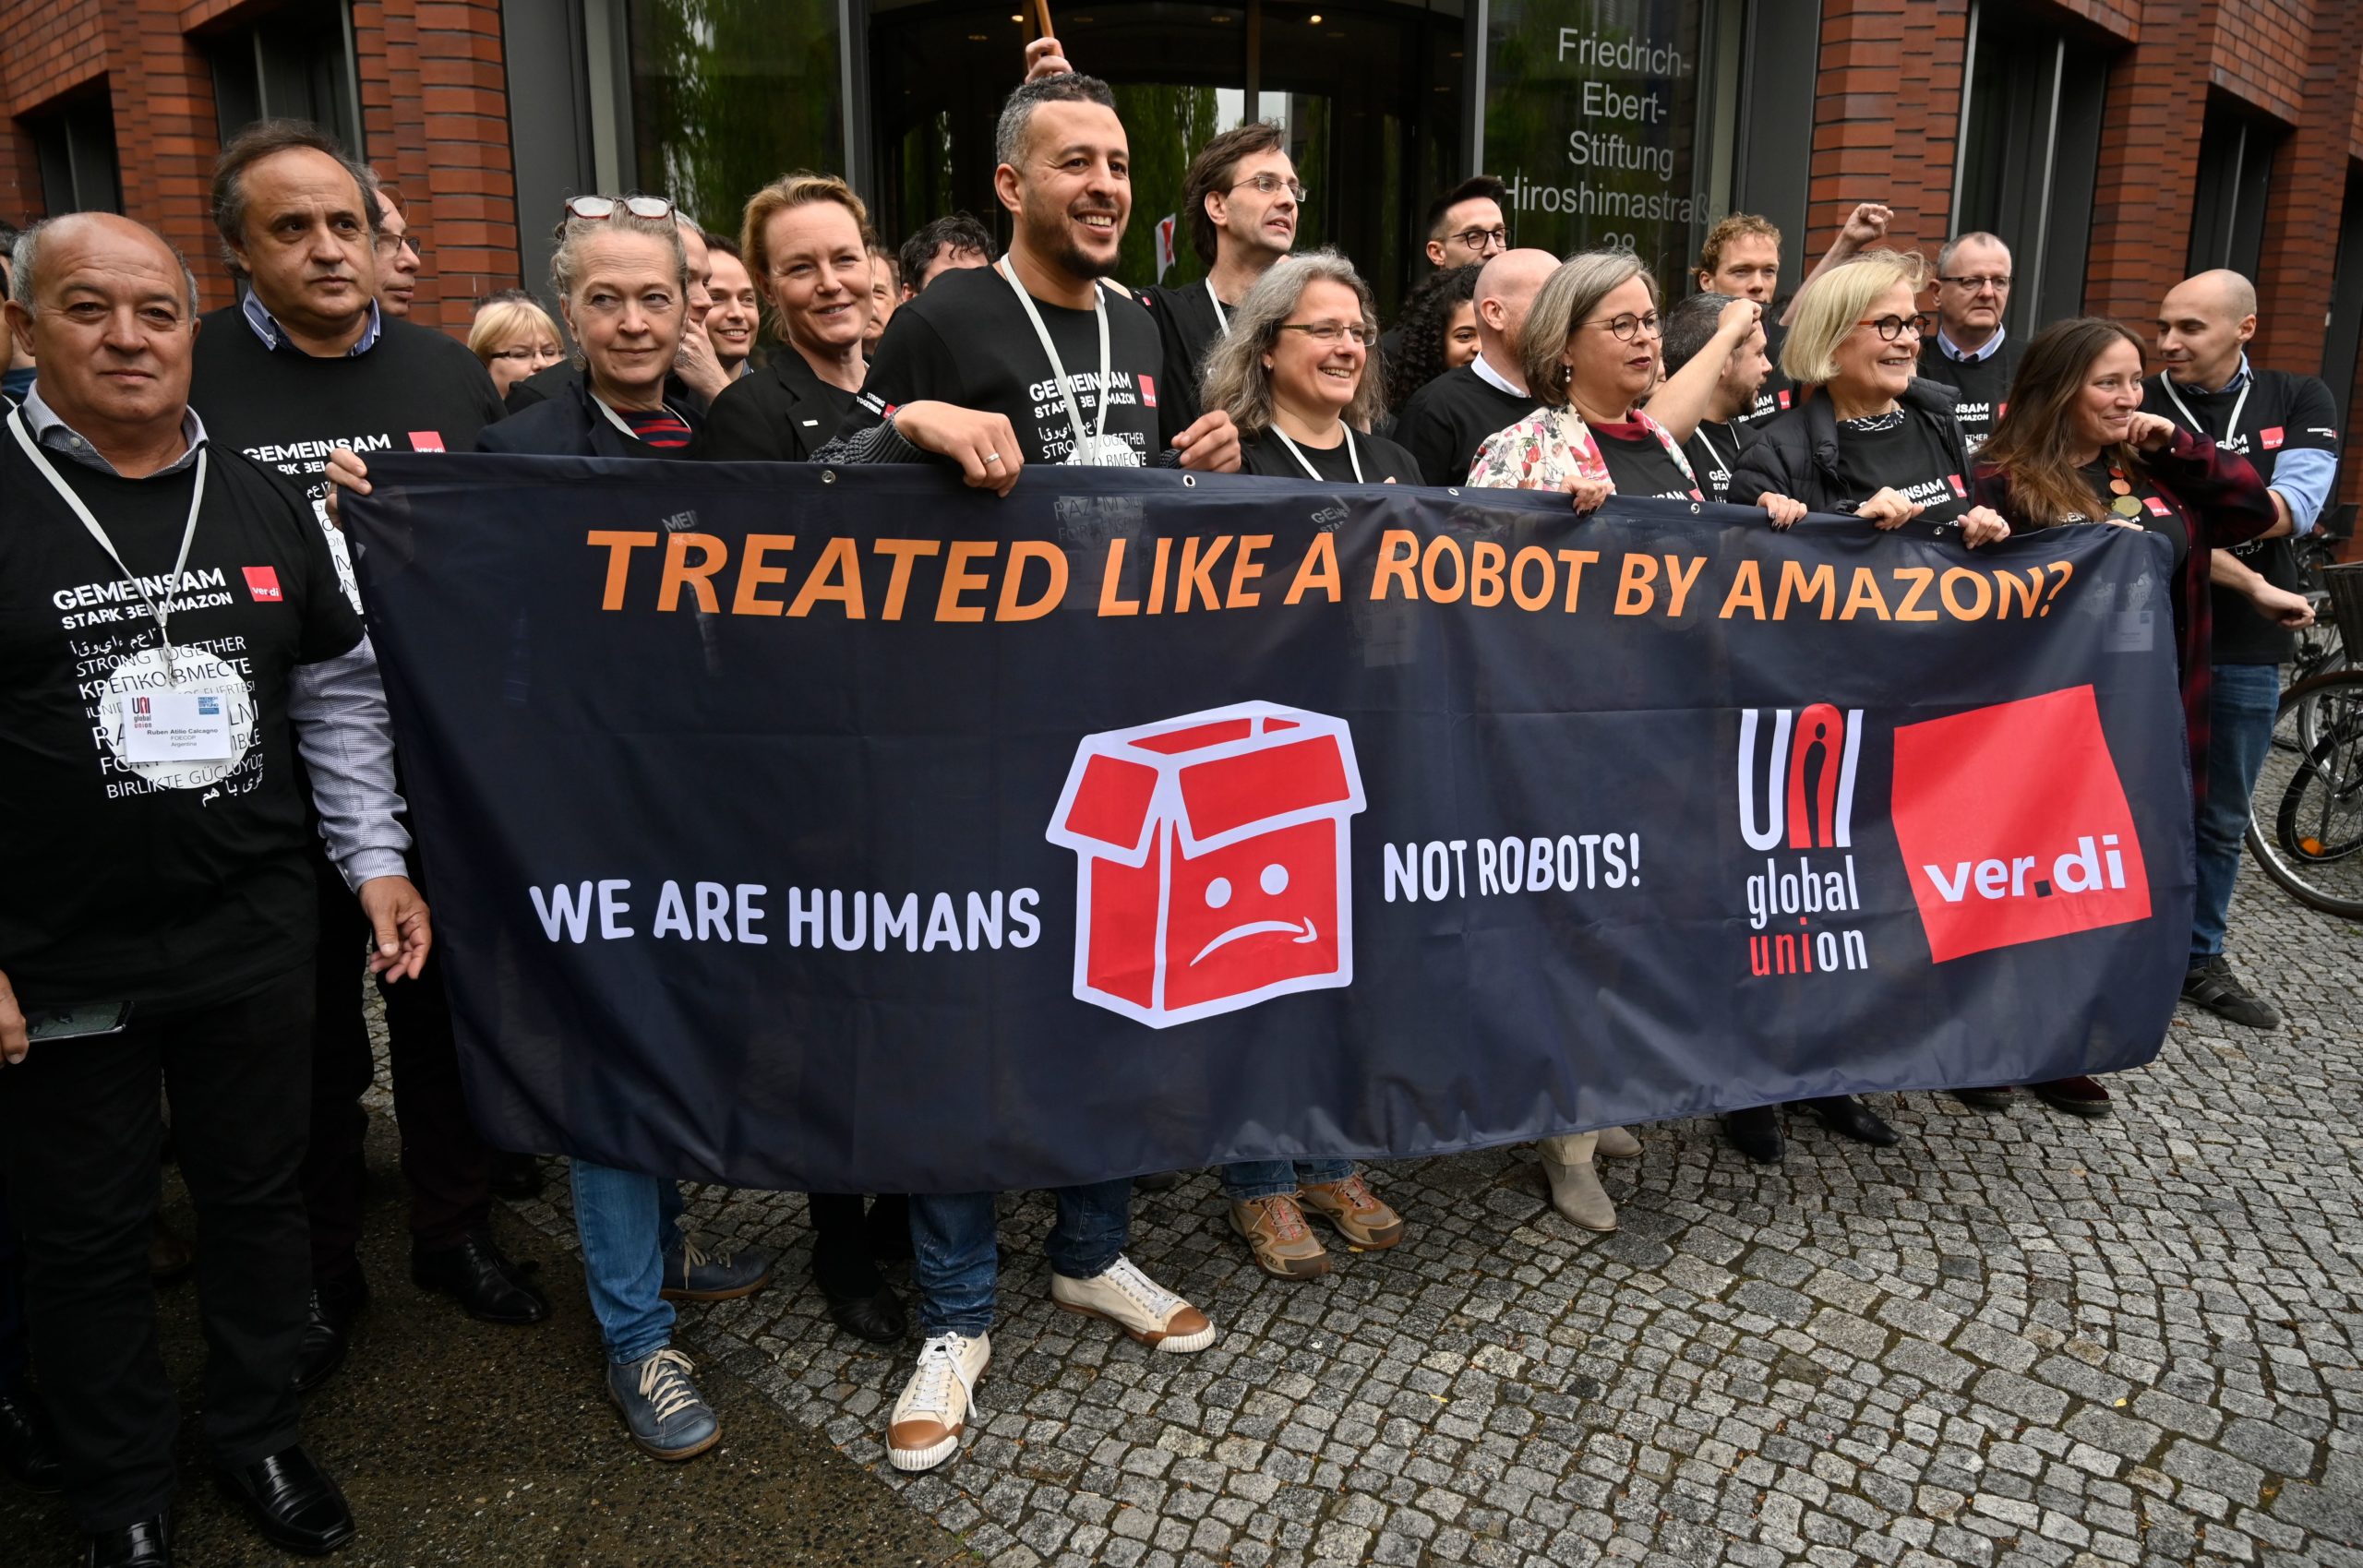 Representatives of Amazon workers hold a banner reading "We are Humans not robots!" as they demonstrate on April 29, 2019 in front of the headquarters of the Friedrich-Ebert Foundation in Berlin, where an international union meeting was held with the participation of German service workers' union verdi and the UNI global union. (John MacDougall/AFP via Getty Images)